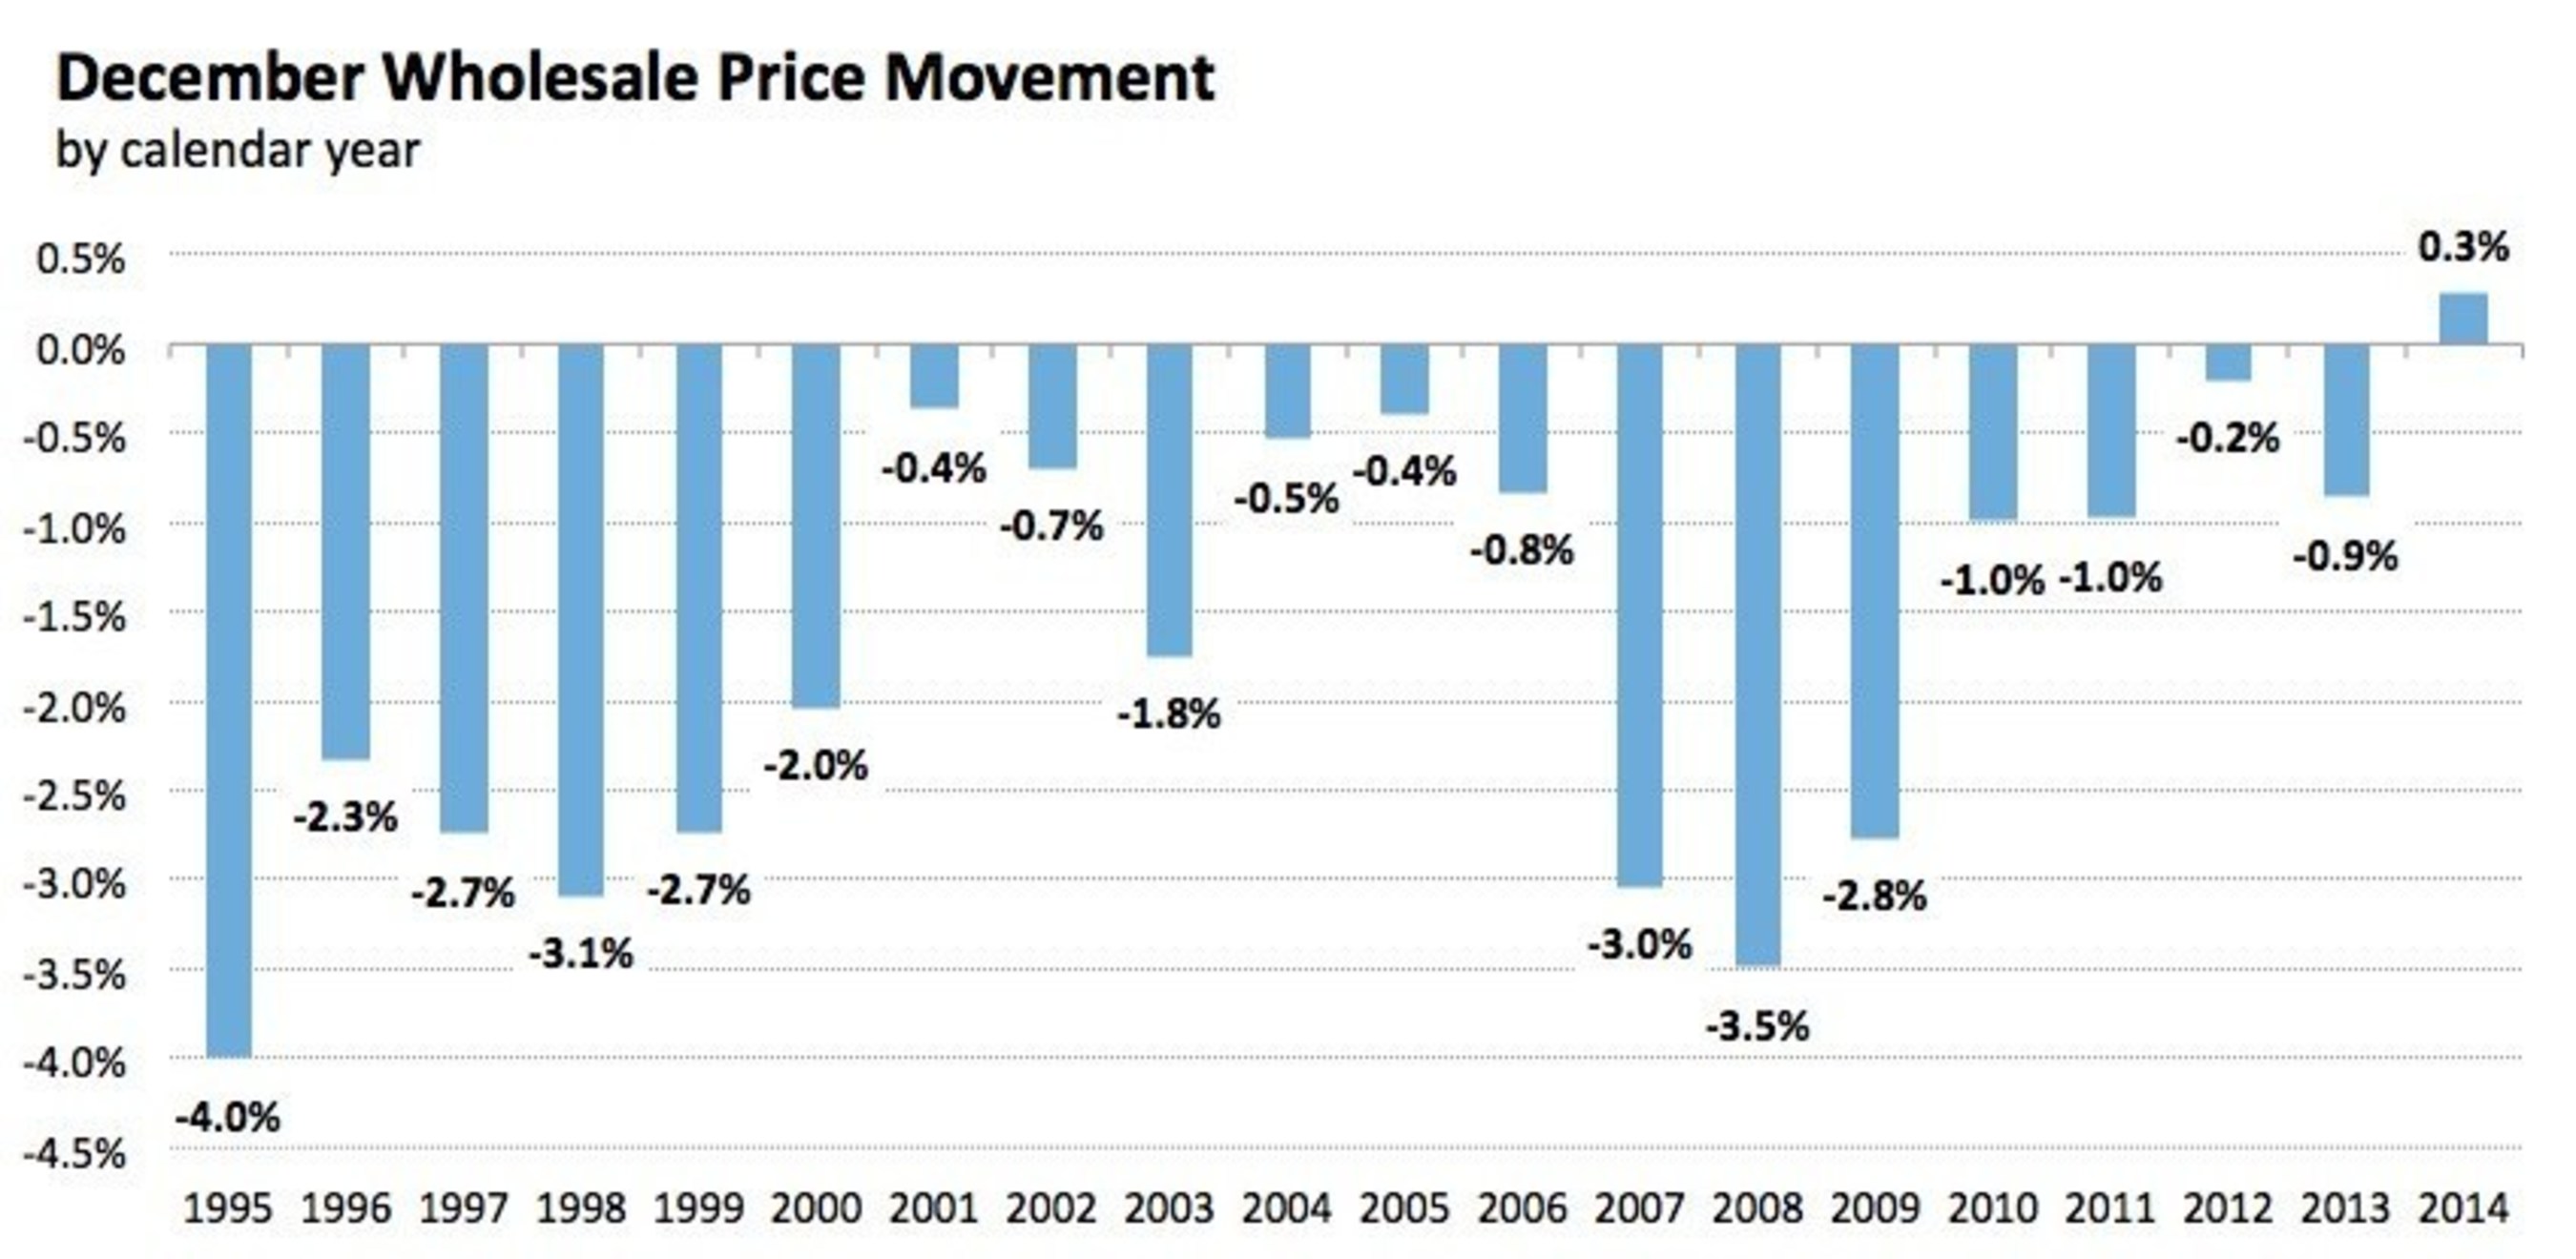 December whole price movement from 1995 through 2014.